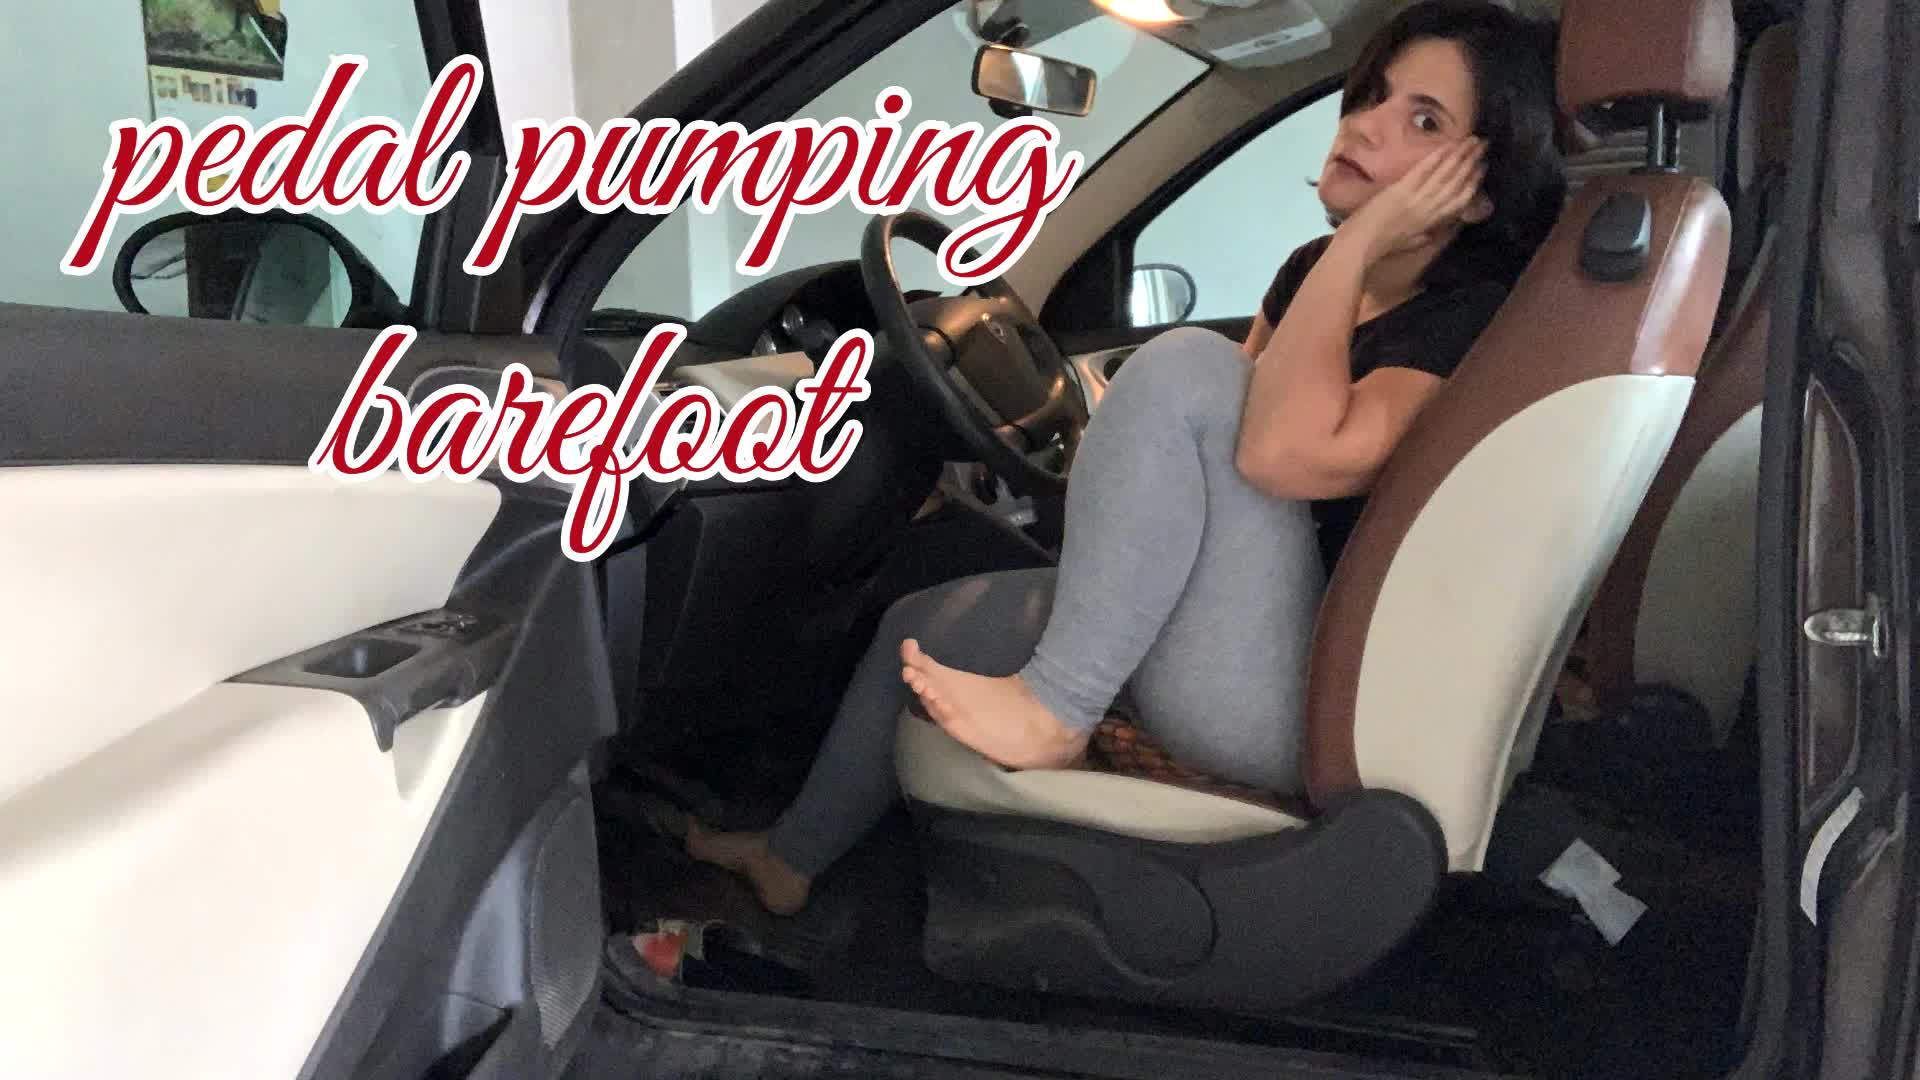 Stockings Pedal Pumping - Pedal Pumping-Revving - Porn Video Clips For Sale at iWantClips